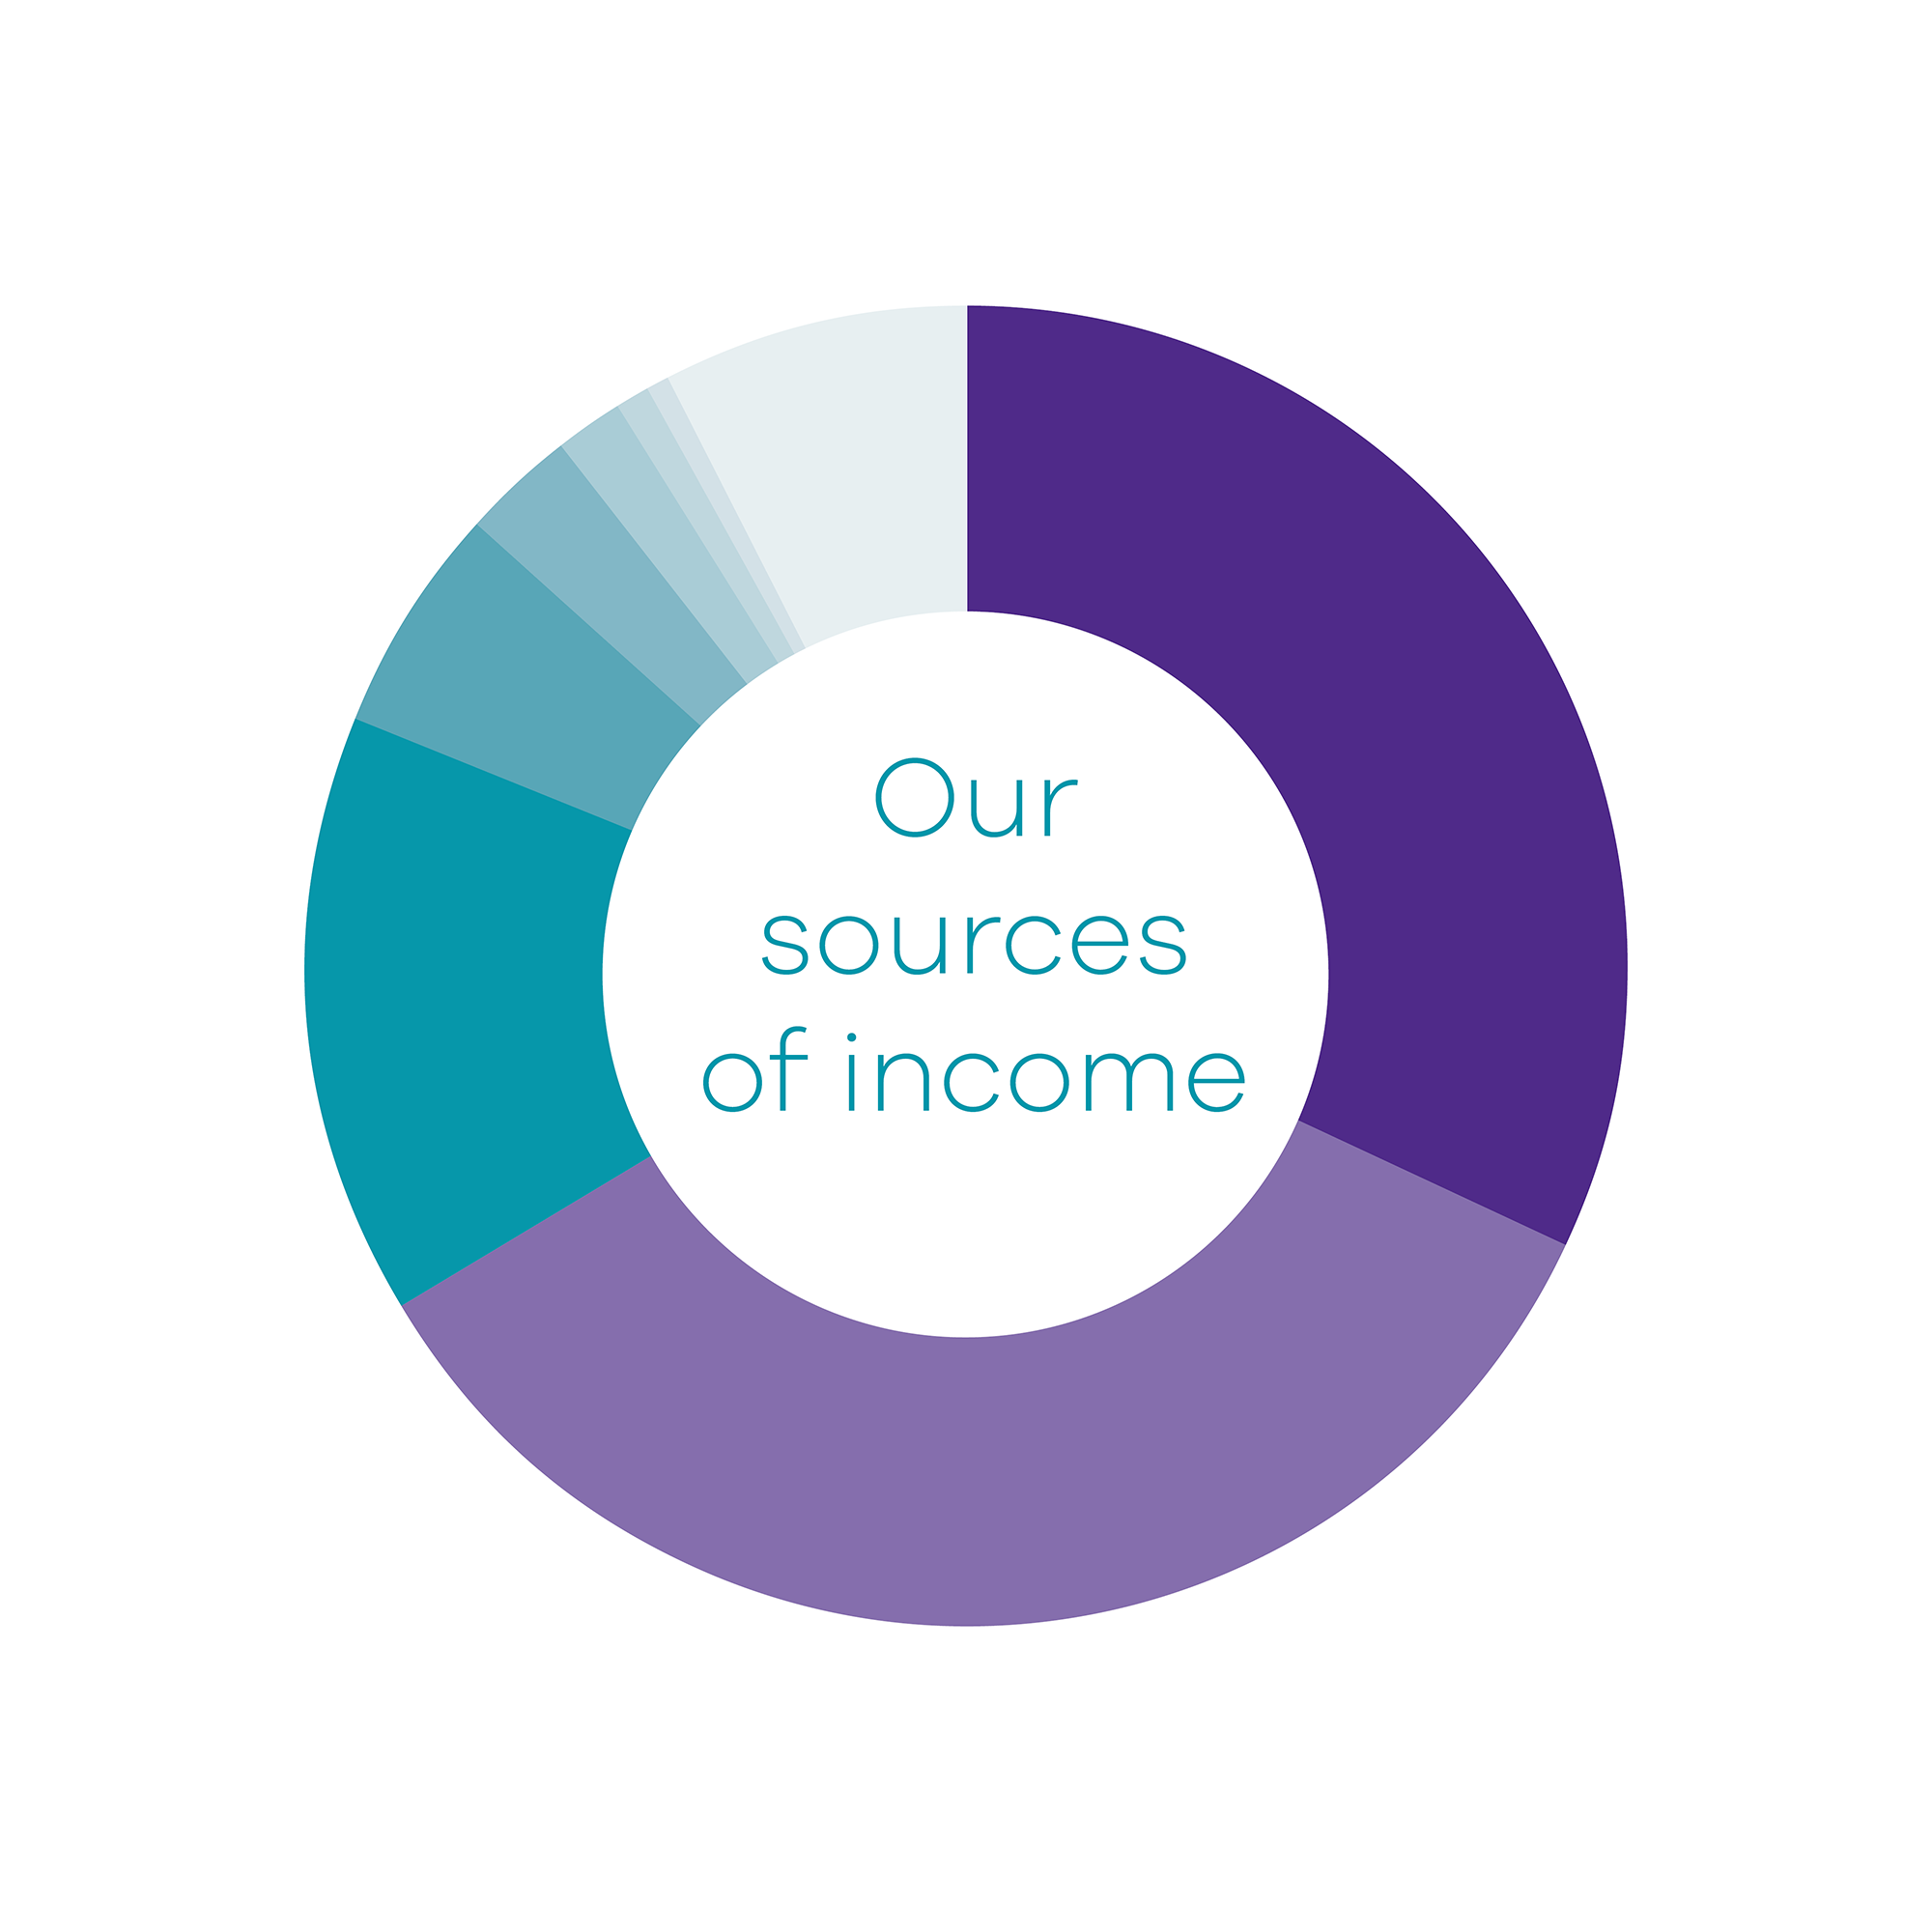 A pie graph breaking down where income comes from